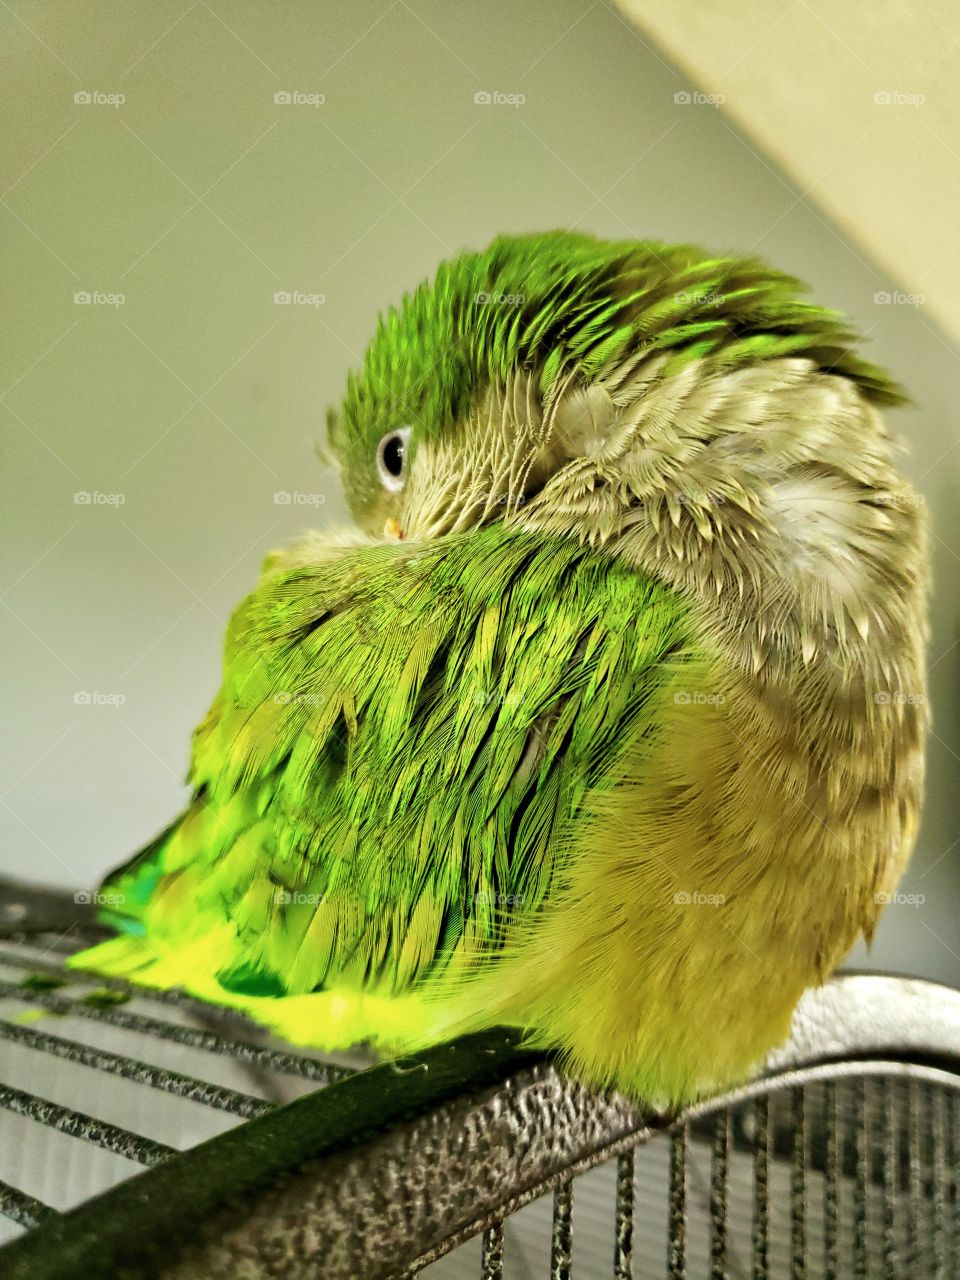 Sleeping while showing his magnificent green colored feathers